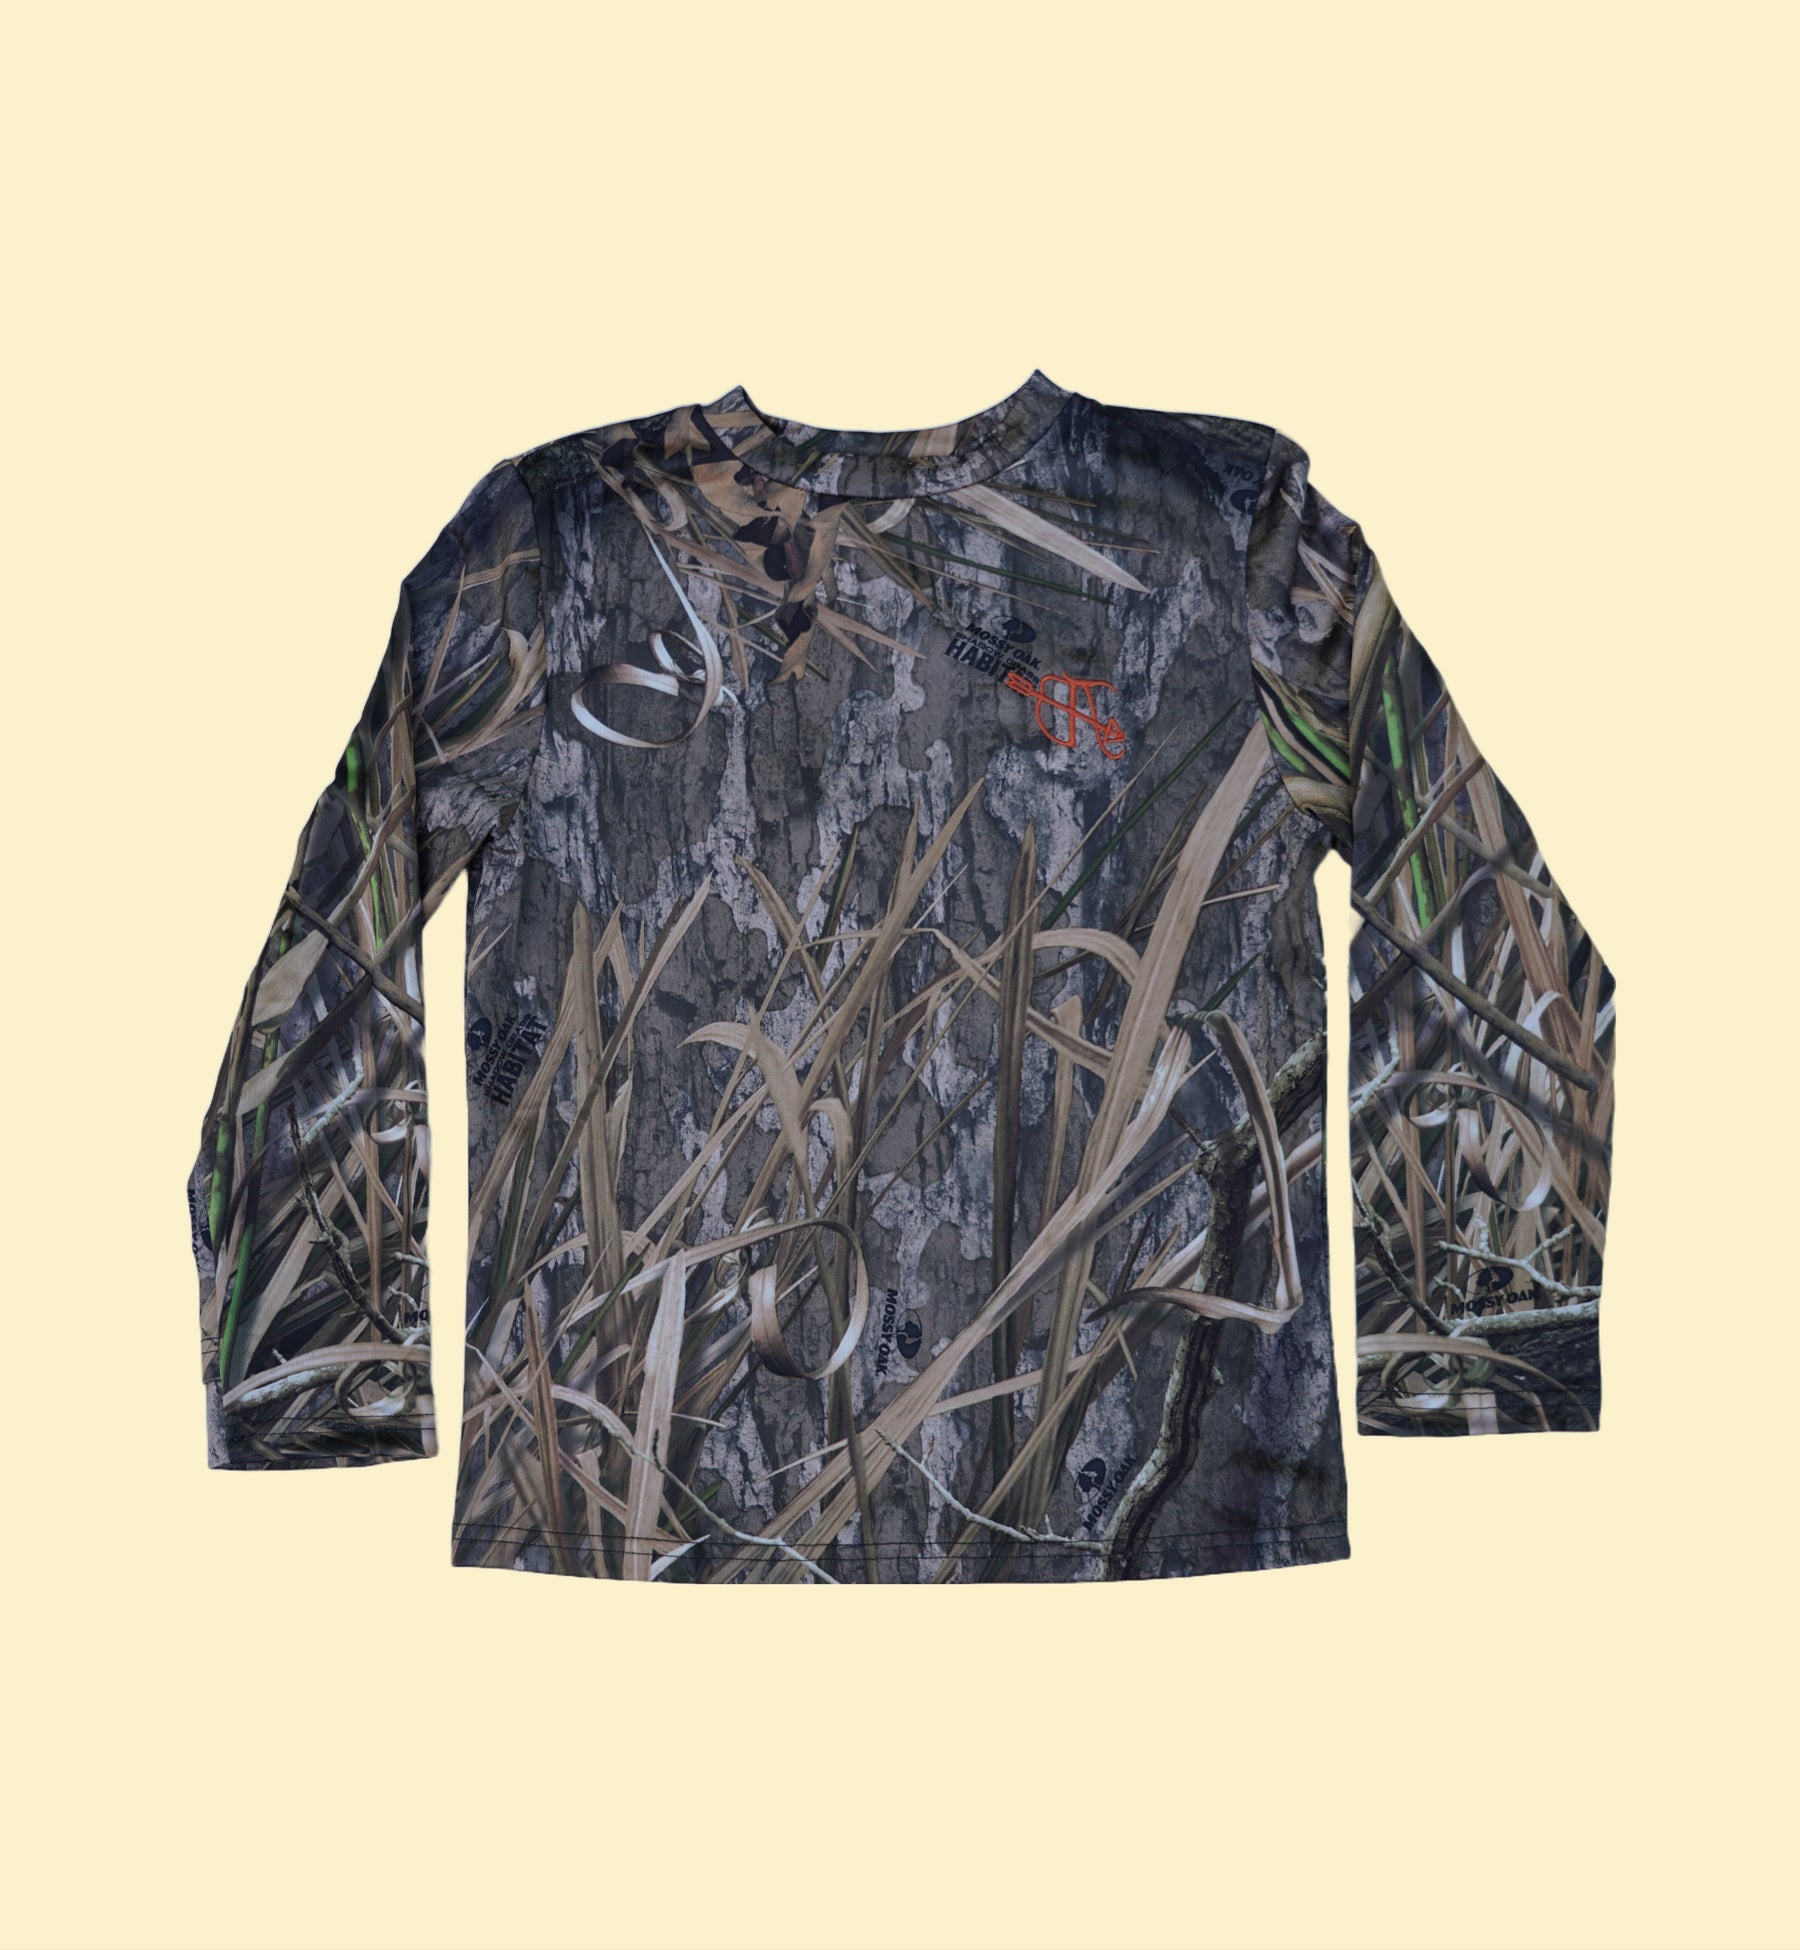 Crew Neck Long Sleeve Shirt by Bow and Arrow Outdoors - Sportsman Gear